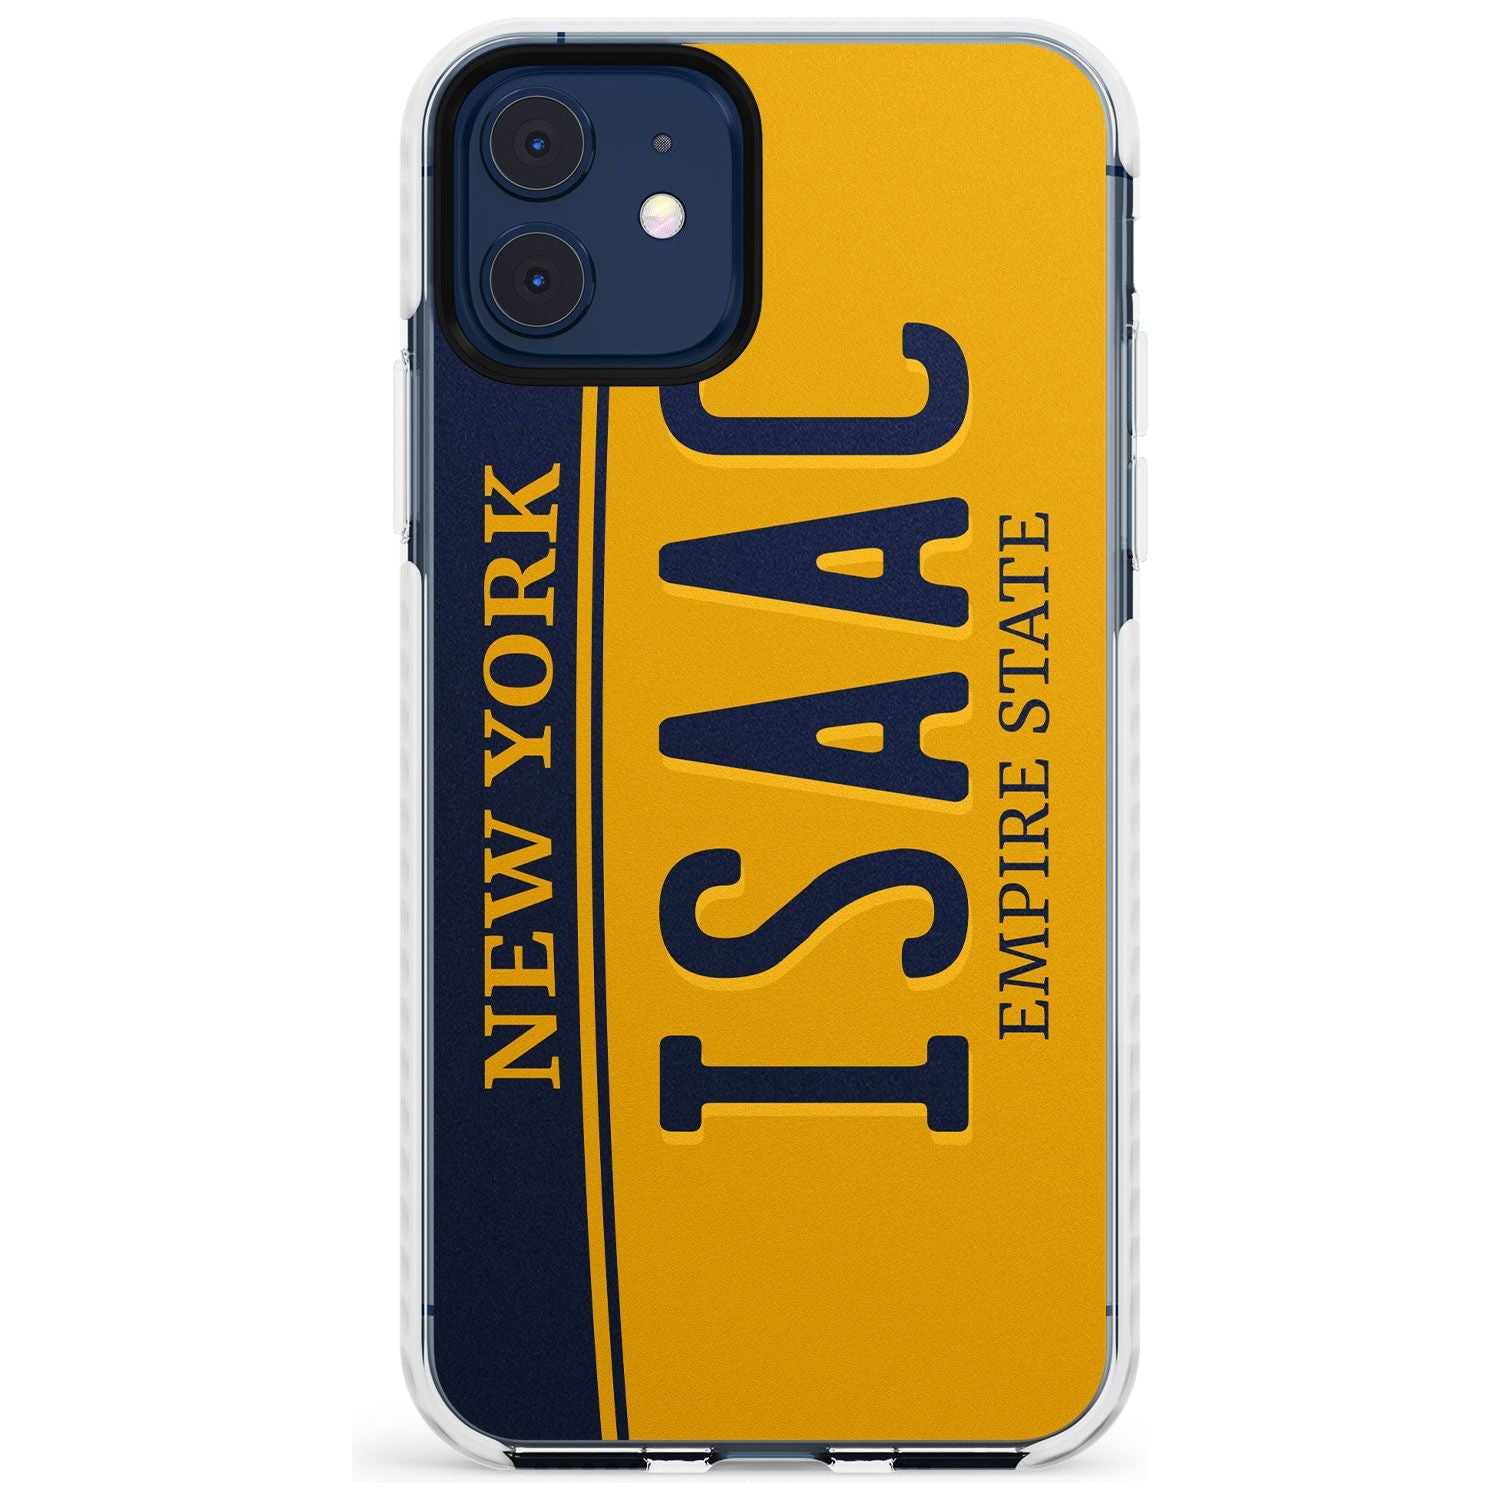 New York License Plate Slim TPU Phone Case for iPhone 11